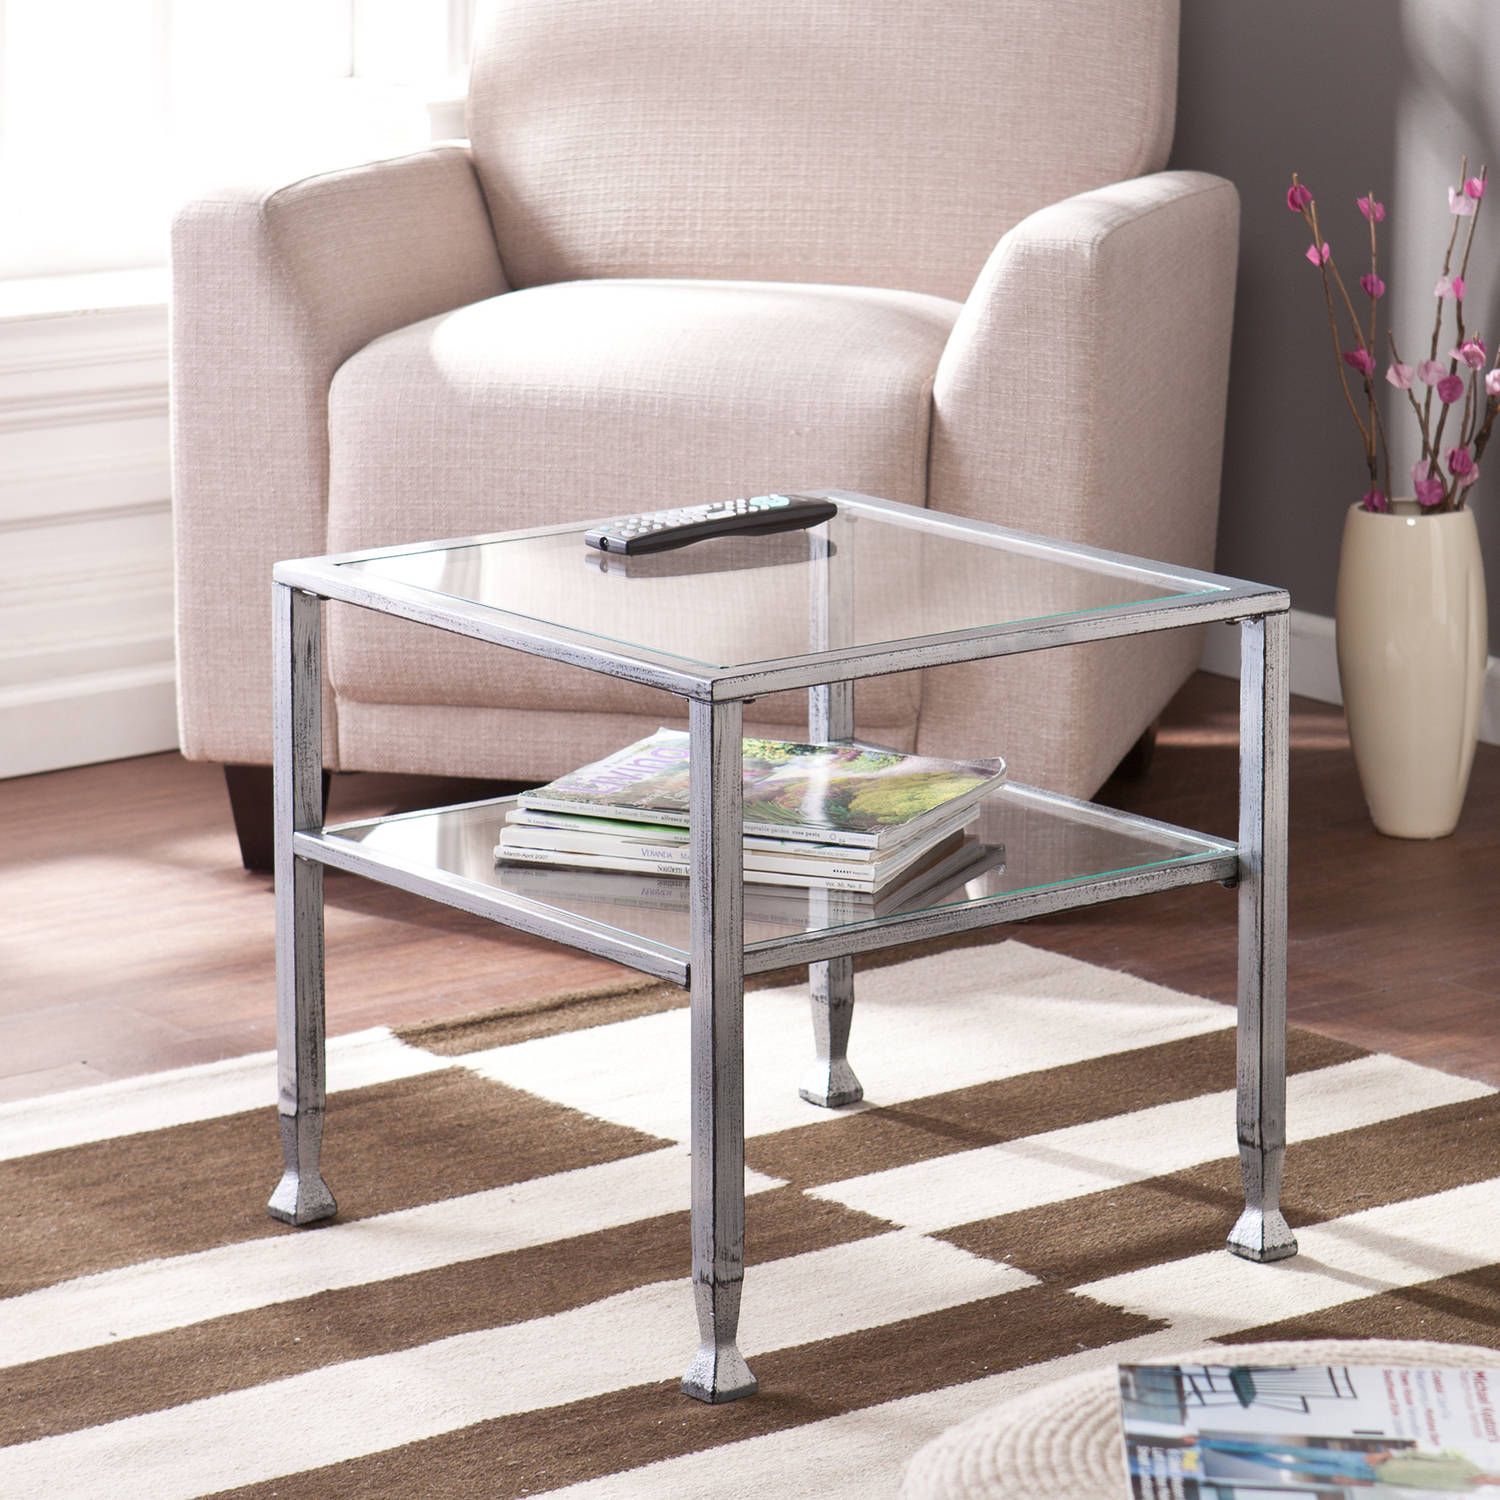 Blundell Metal/glass Cocktail Table, Silver With Black Within Black Metal Cocktail Tables (View 4 of 15)